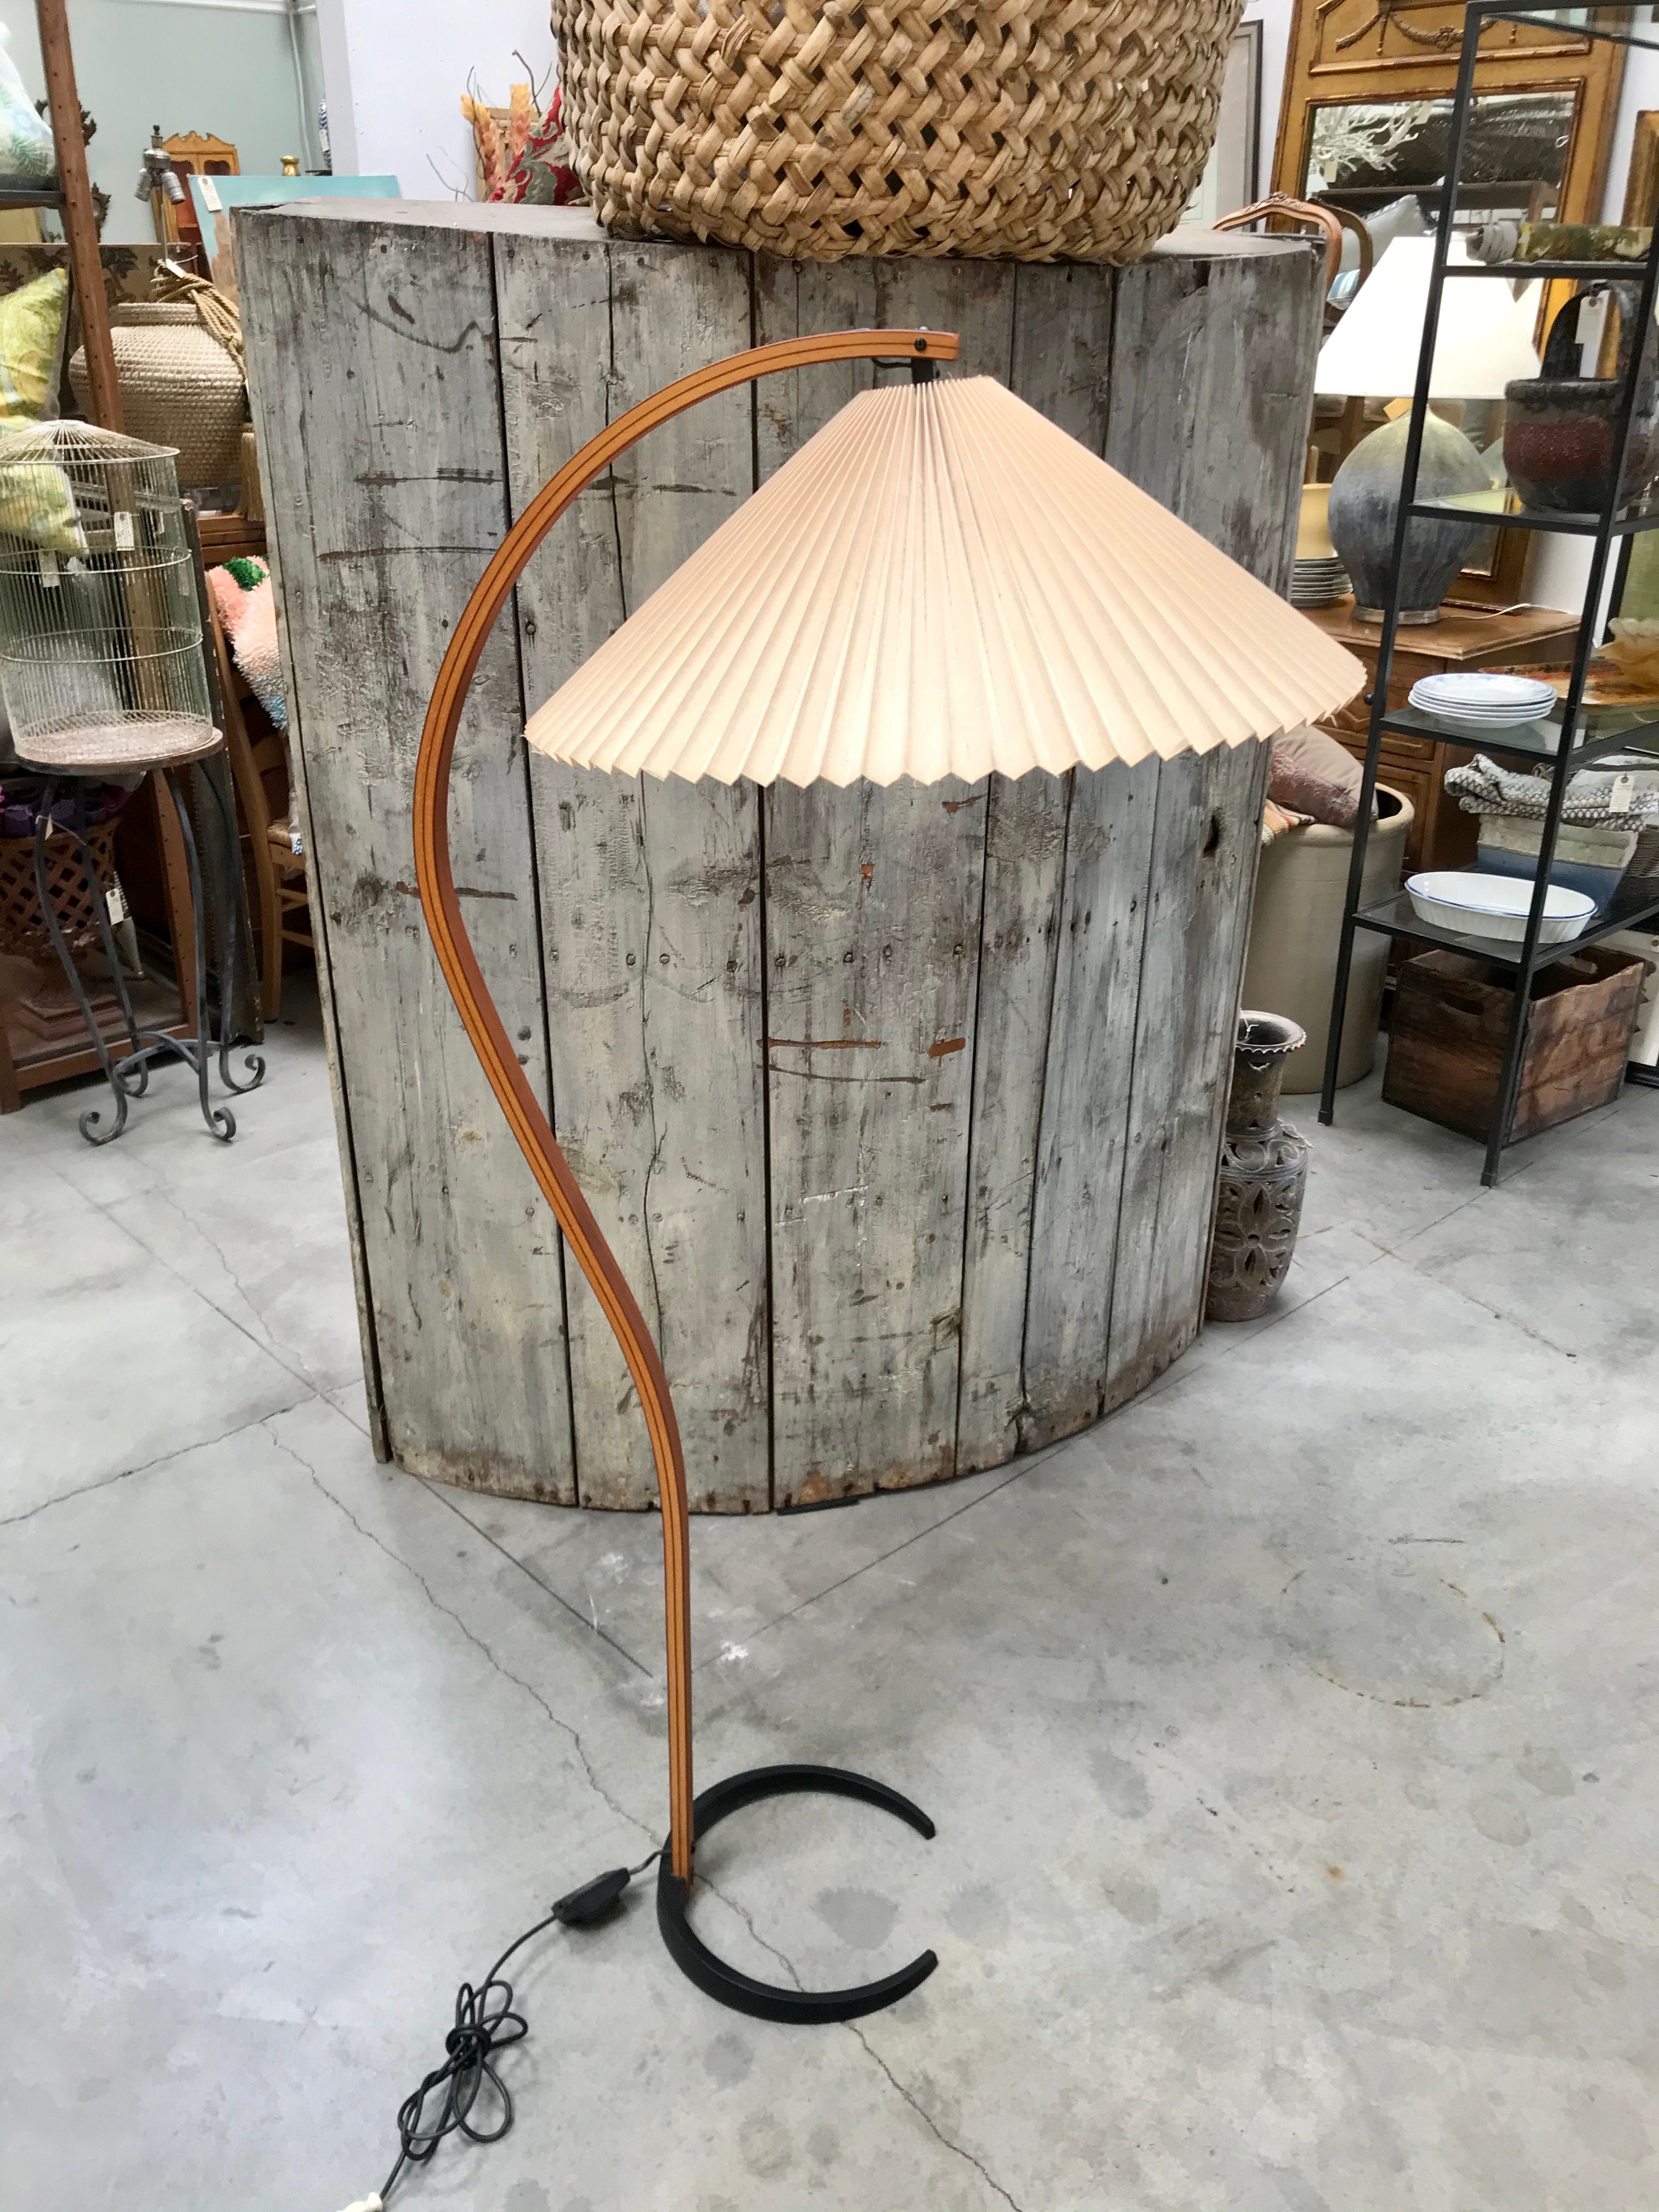 Nice bent wood design
Original shade
Iron base
Original wiring and condition
No damage or repairs
Great for any interior.